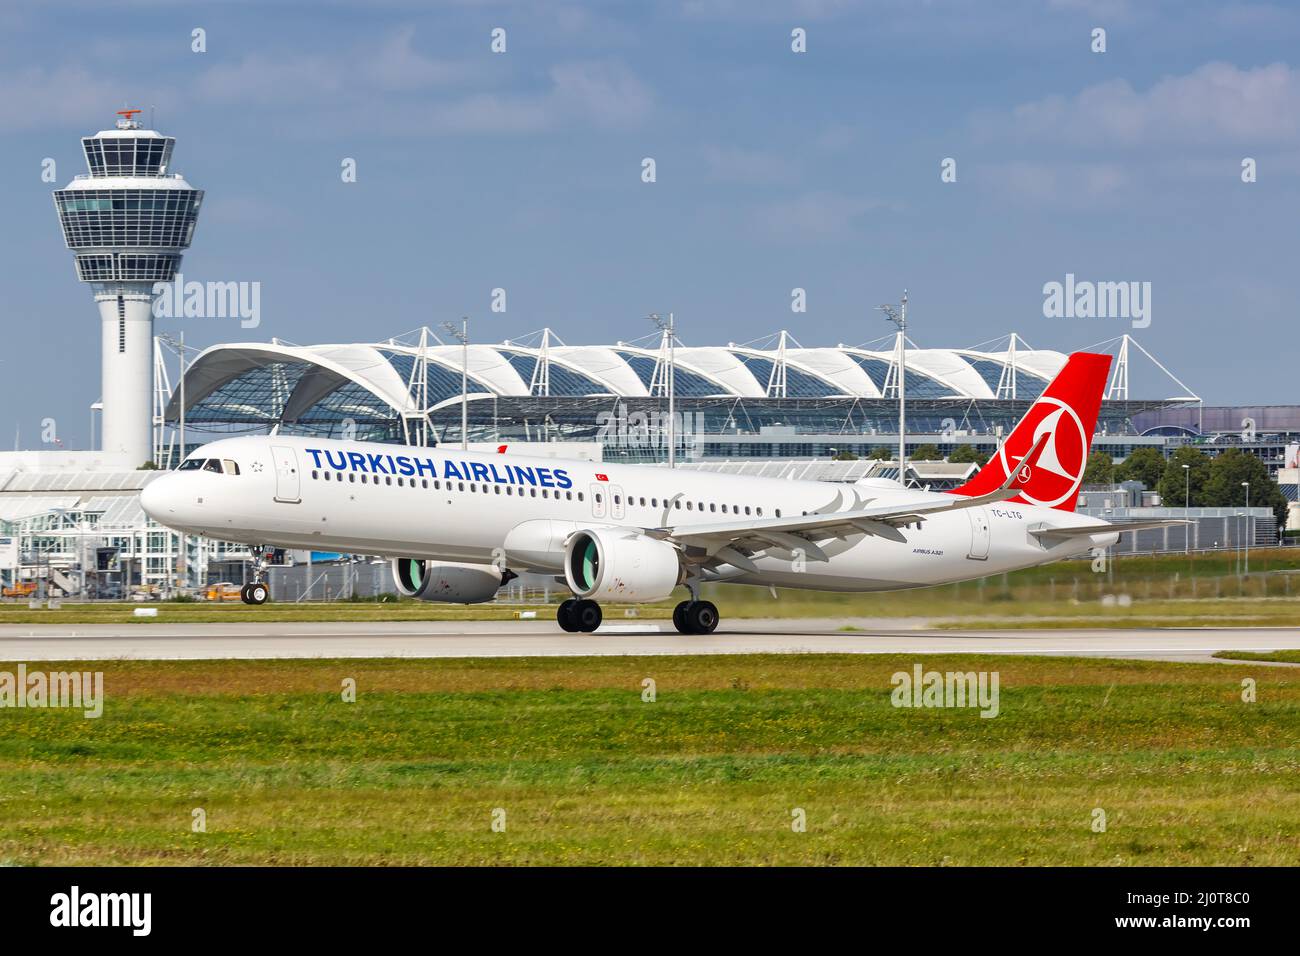 Turkish Airlines Airbus A321neo aircraft Munich Airport in Germany Stock Photo